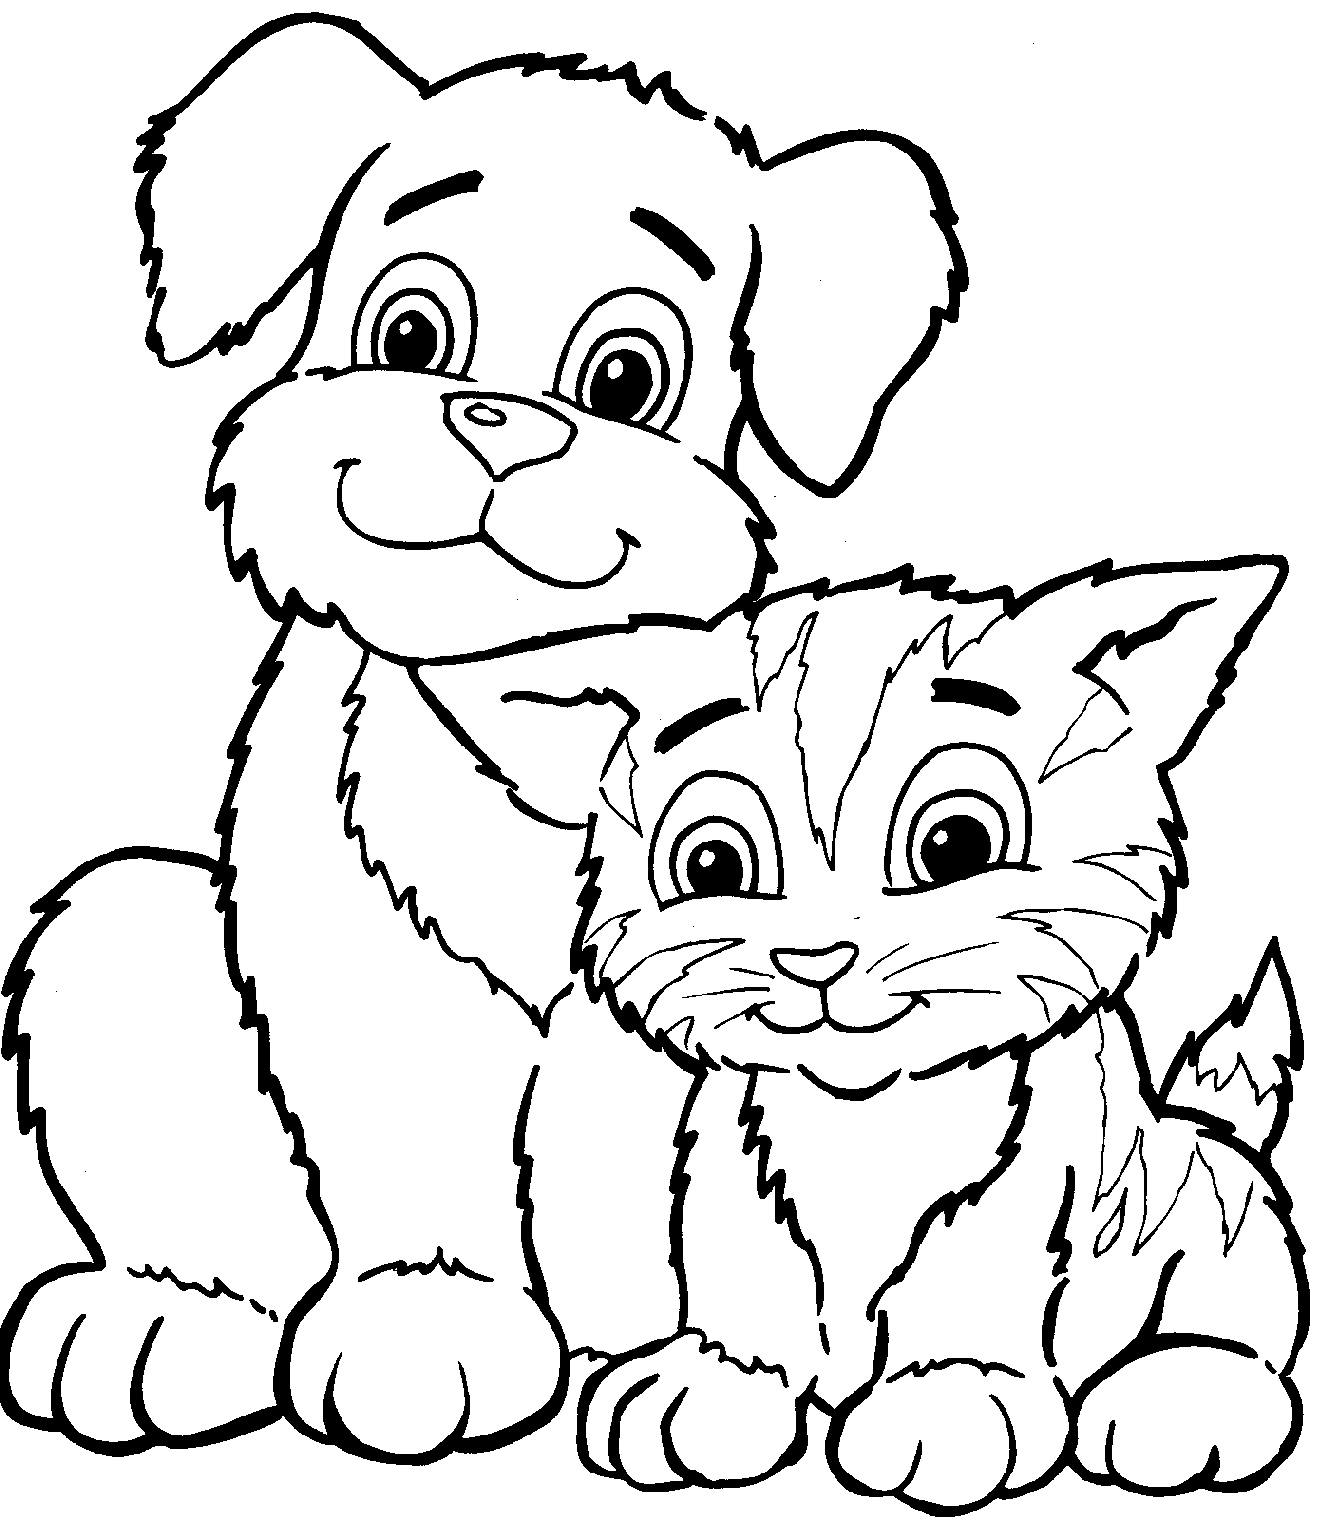 Printable Cat Outline   Free Cliparts That You Can Download To You